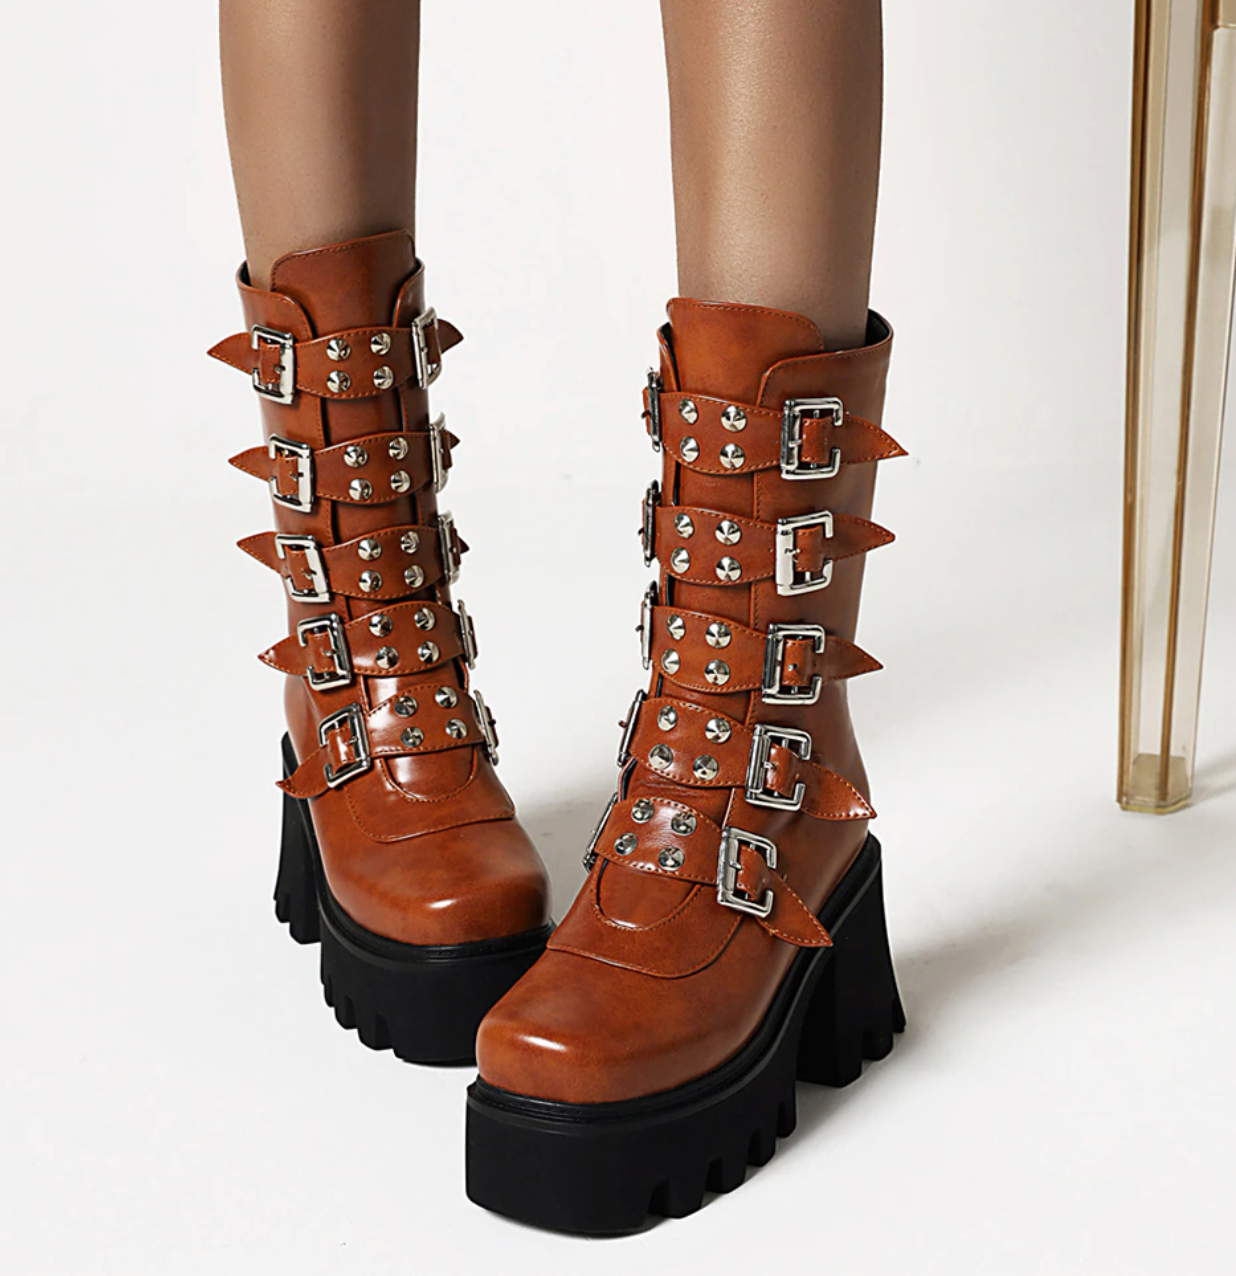 Buckle Straps With Zipper Boots